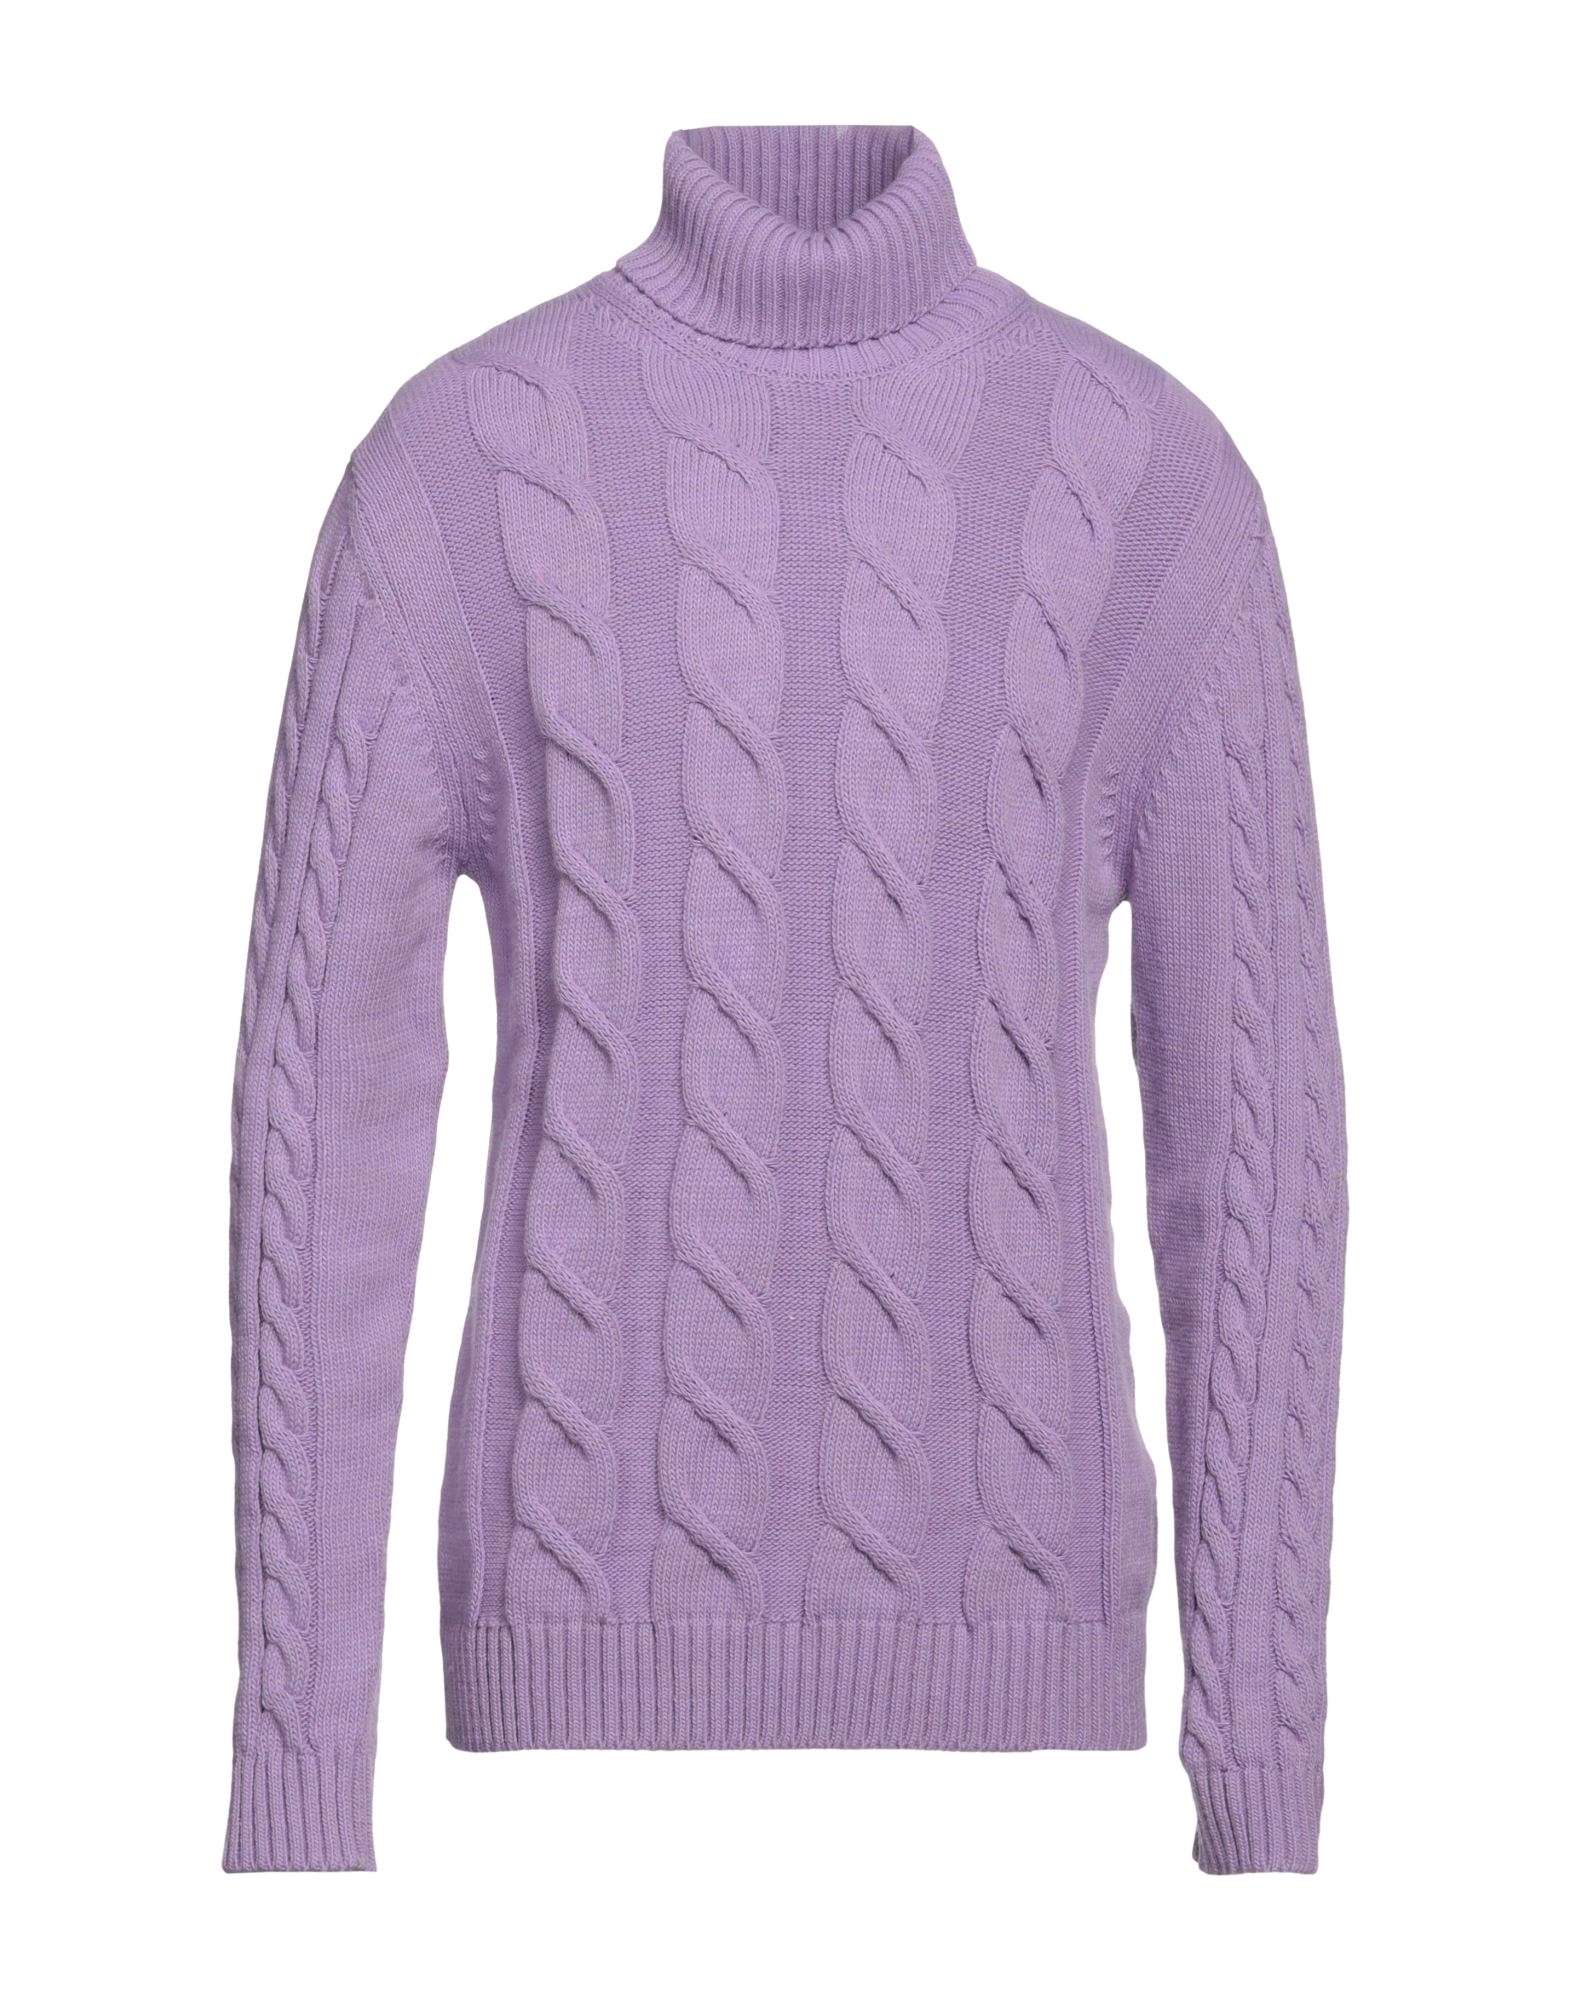 FAMILY FIRST MILANO FAMILY FIRST MILANO MAN TURTLENECK LILAC SIZE L WOOL, POLYAMIDE, ACRYLIC